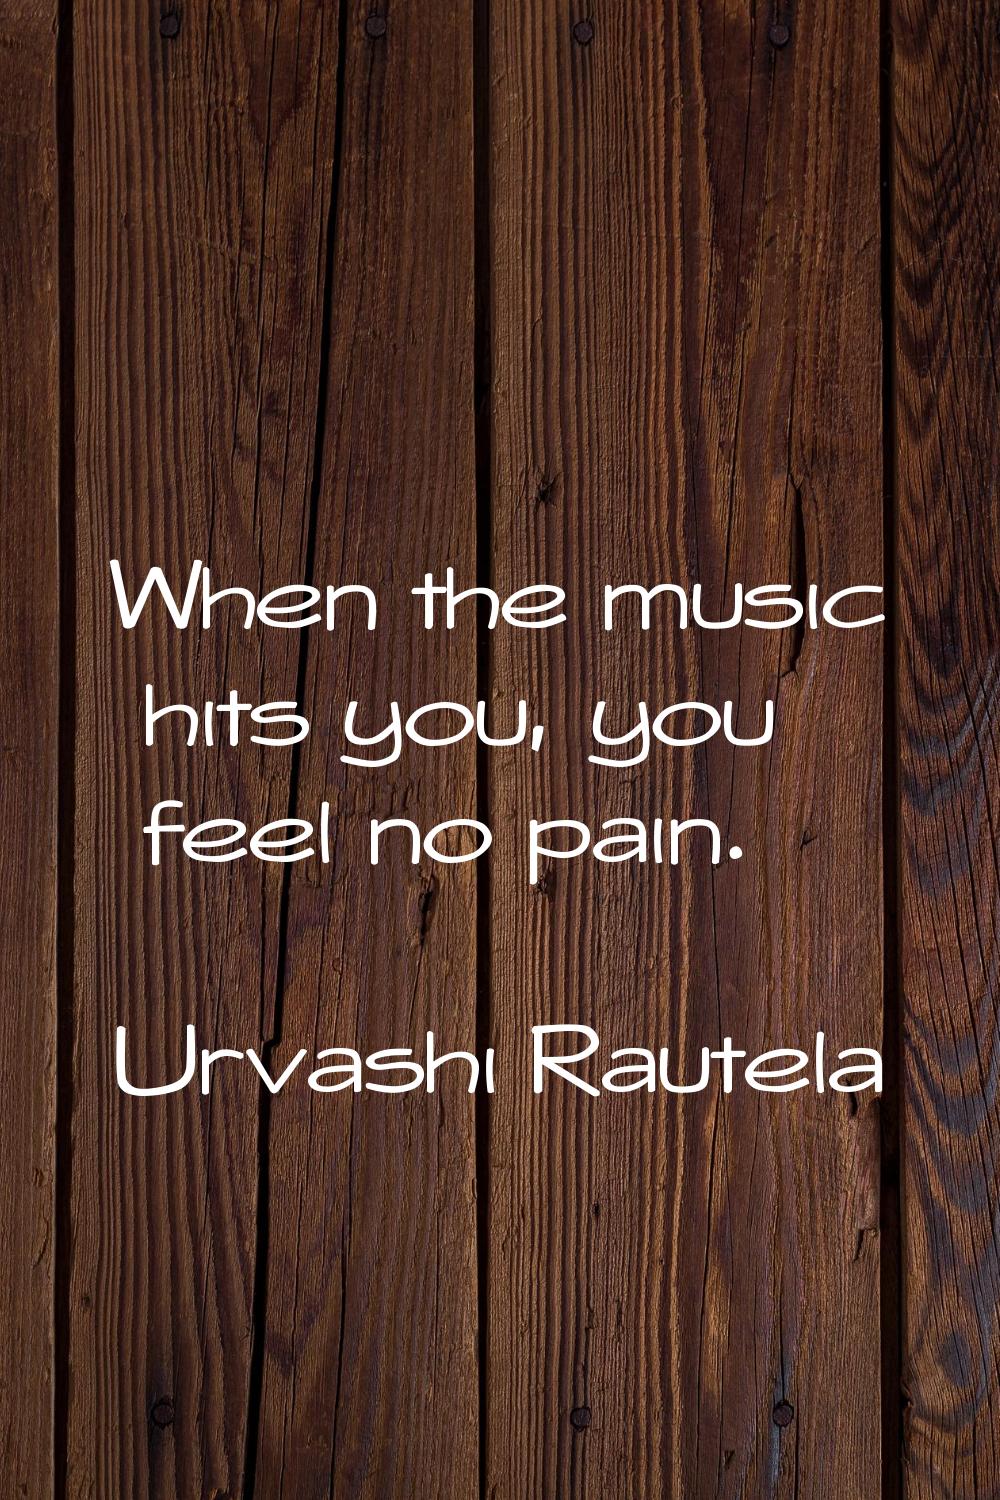 When the music hits you, you feel no pain.